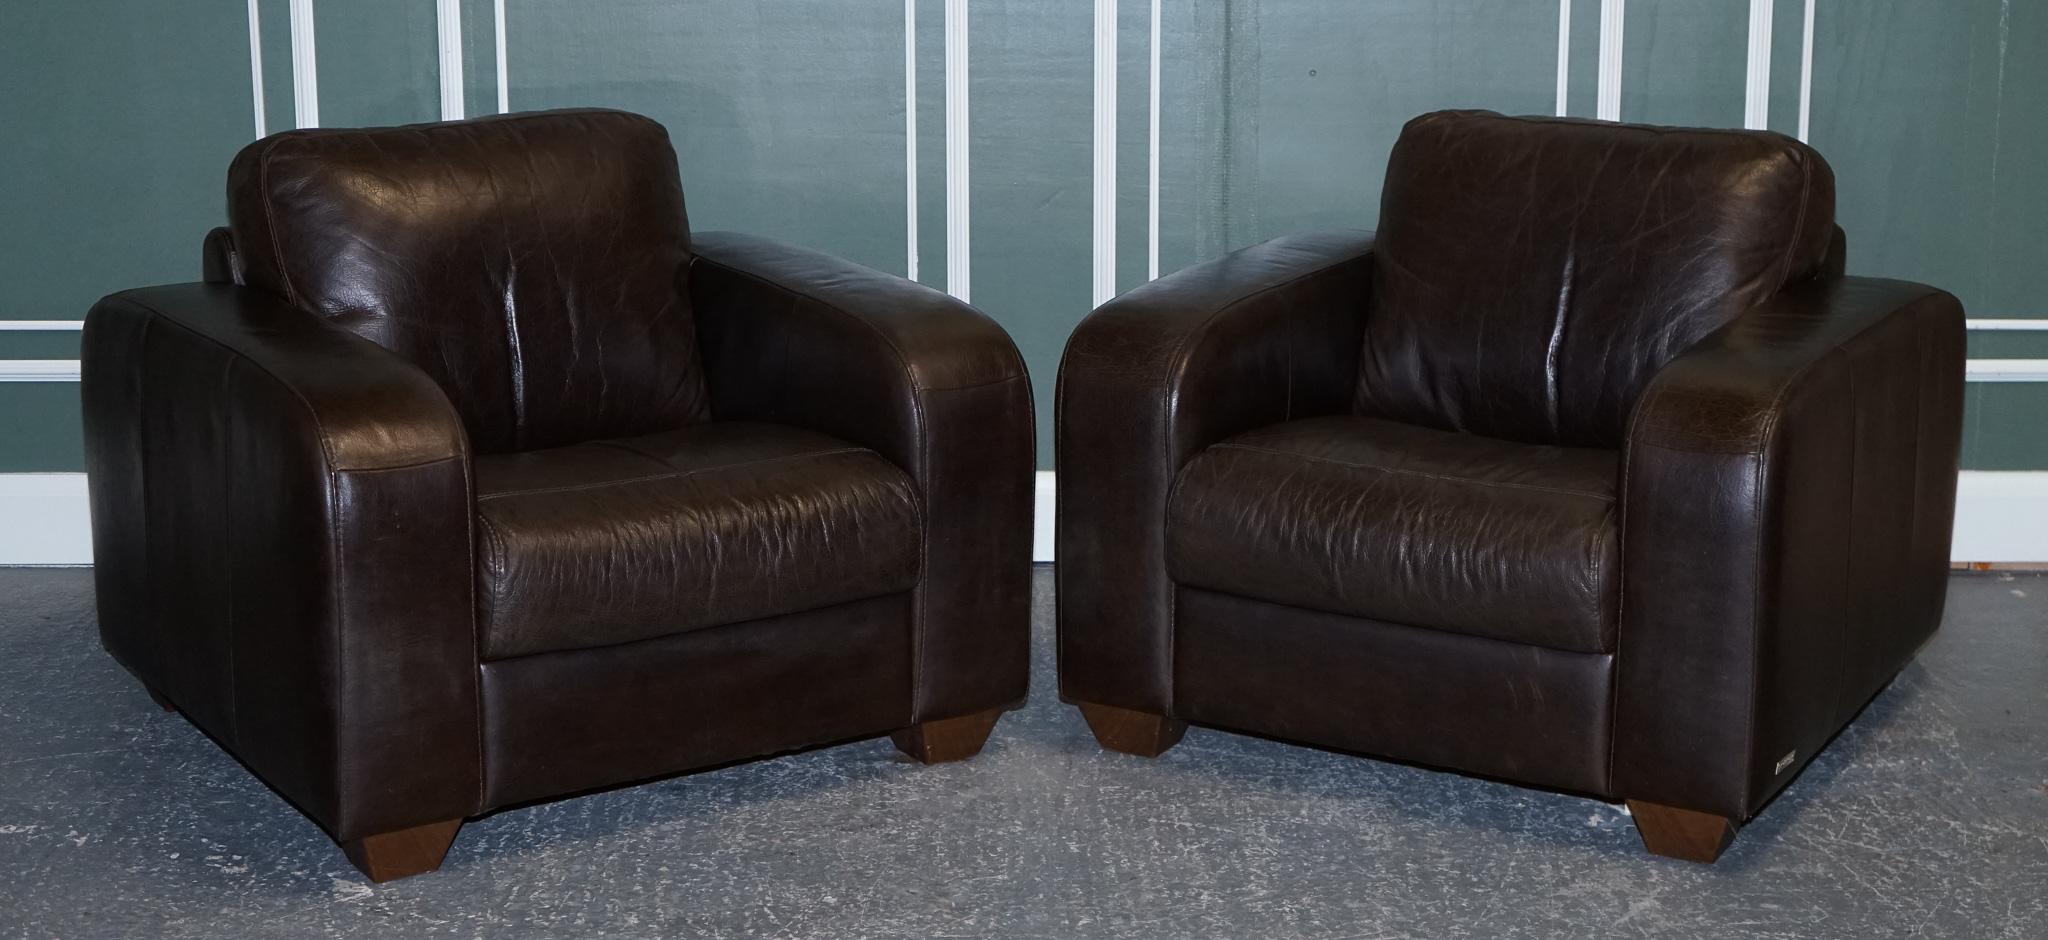 We are delighted to Present this stunning chocolate brown leather pair of armchairs.

The armchairs are made by Sofitalia which is an established Italian company, the leather is of very good Italian cow-hide quality and still has plenty of life to